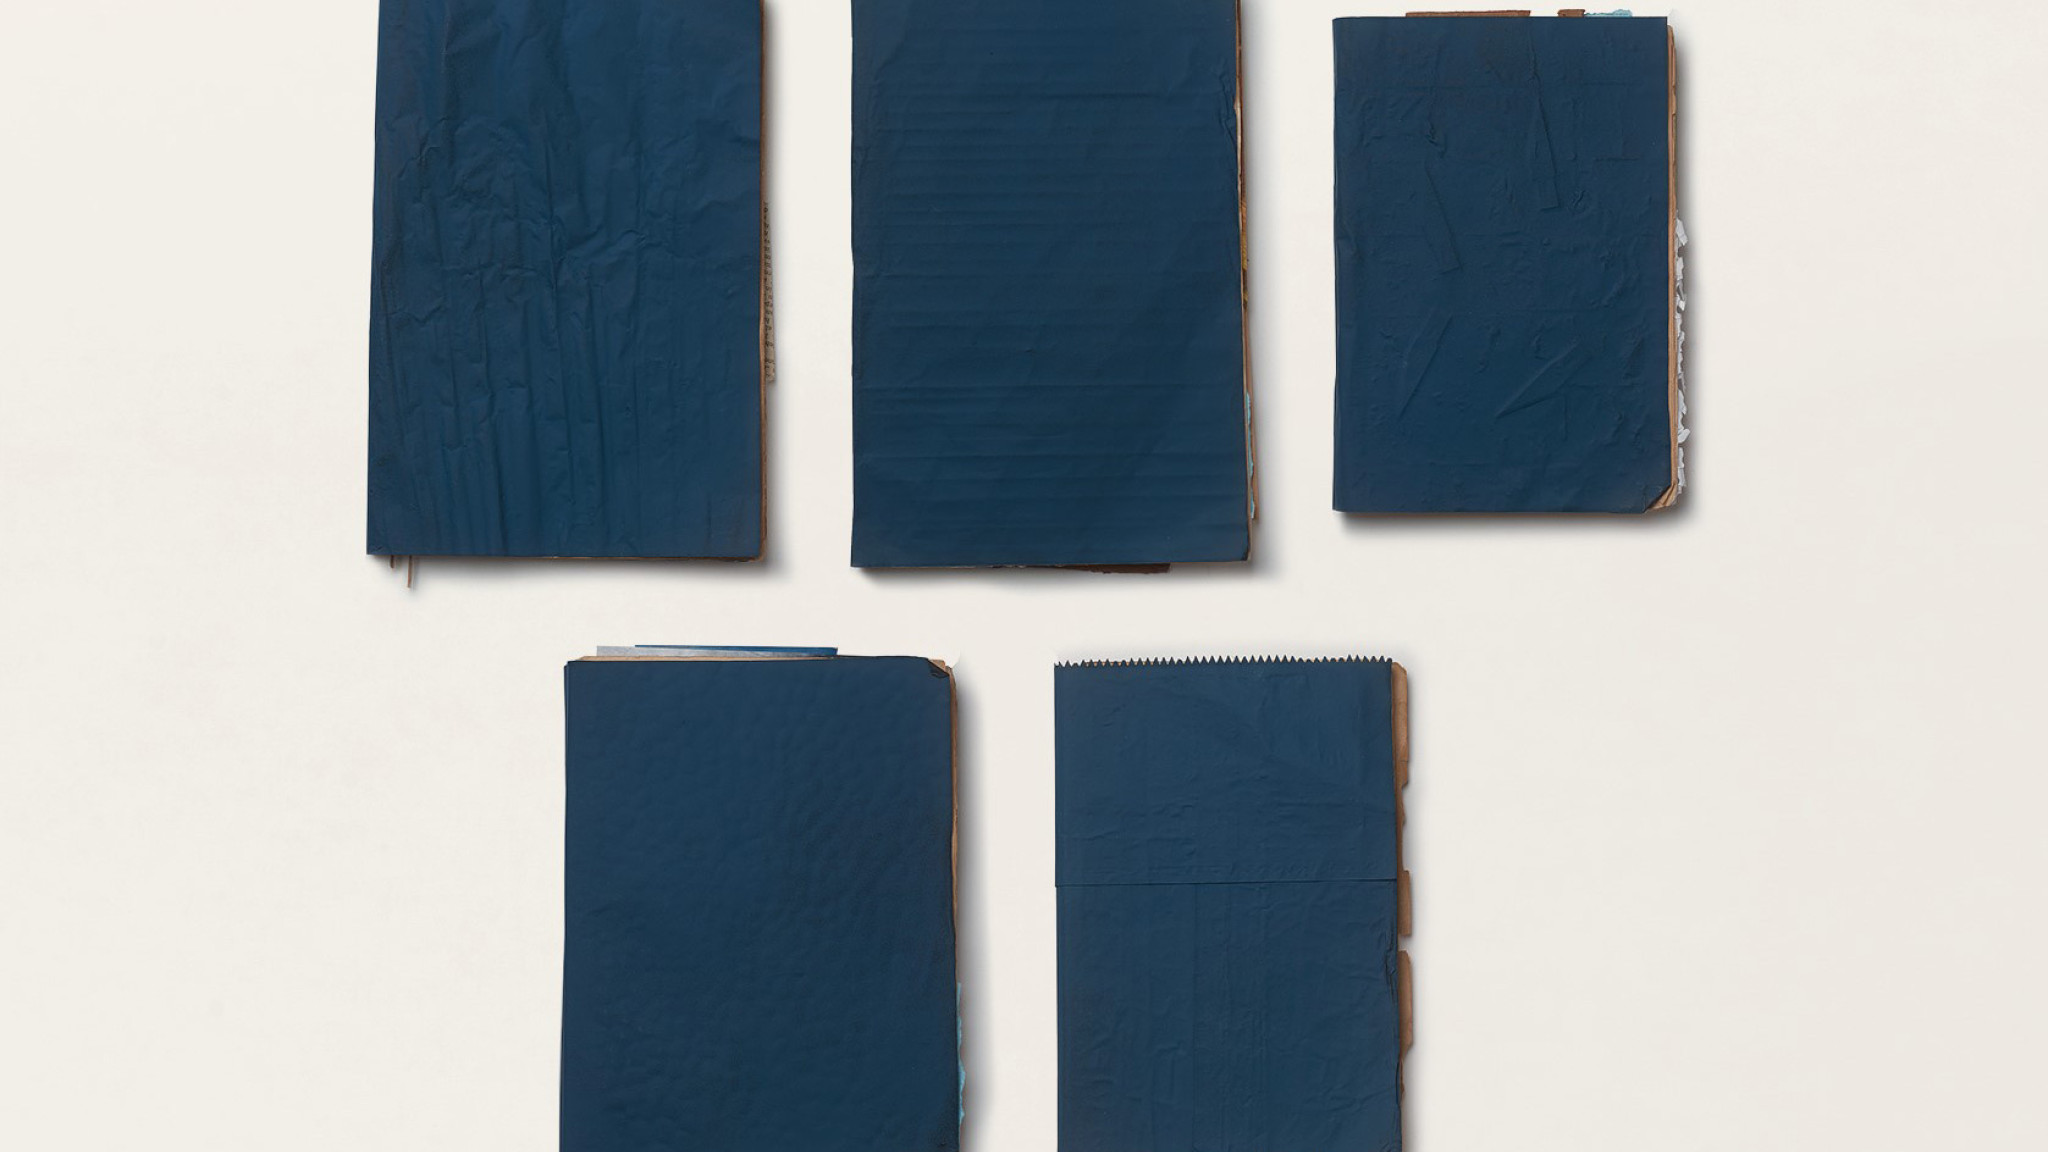 The Blue Notebooks